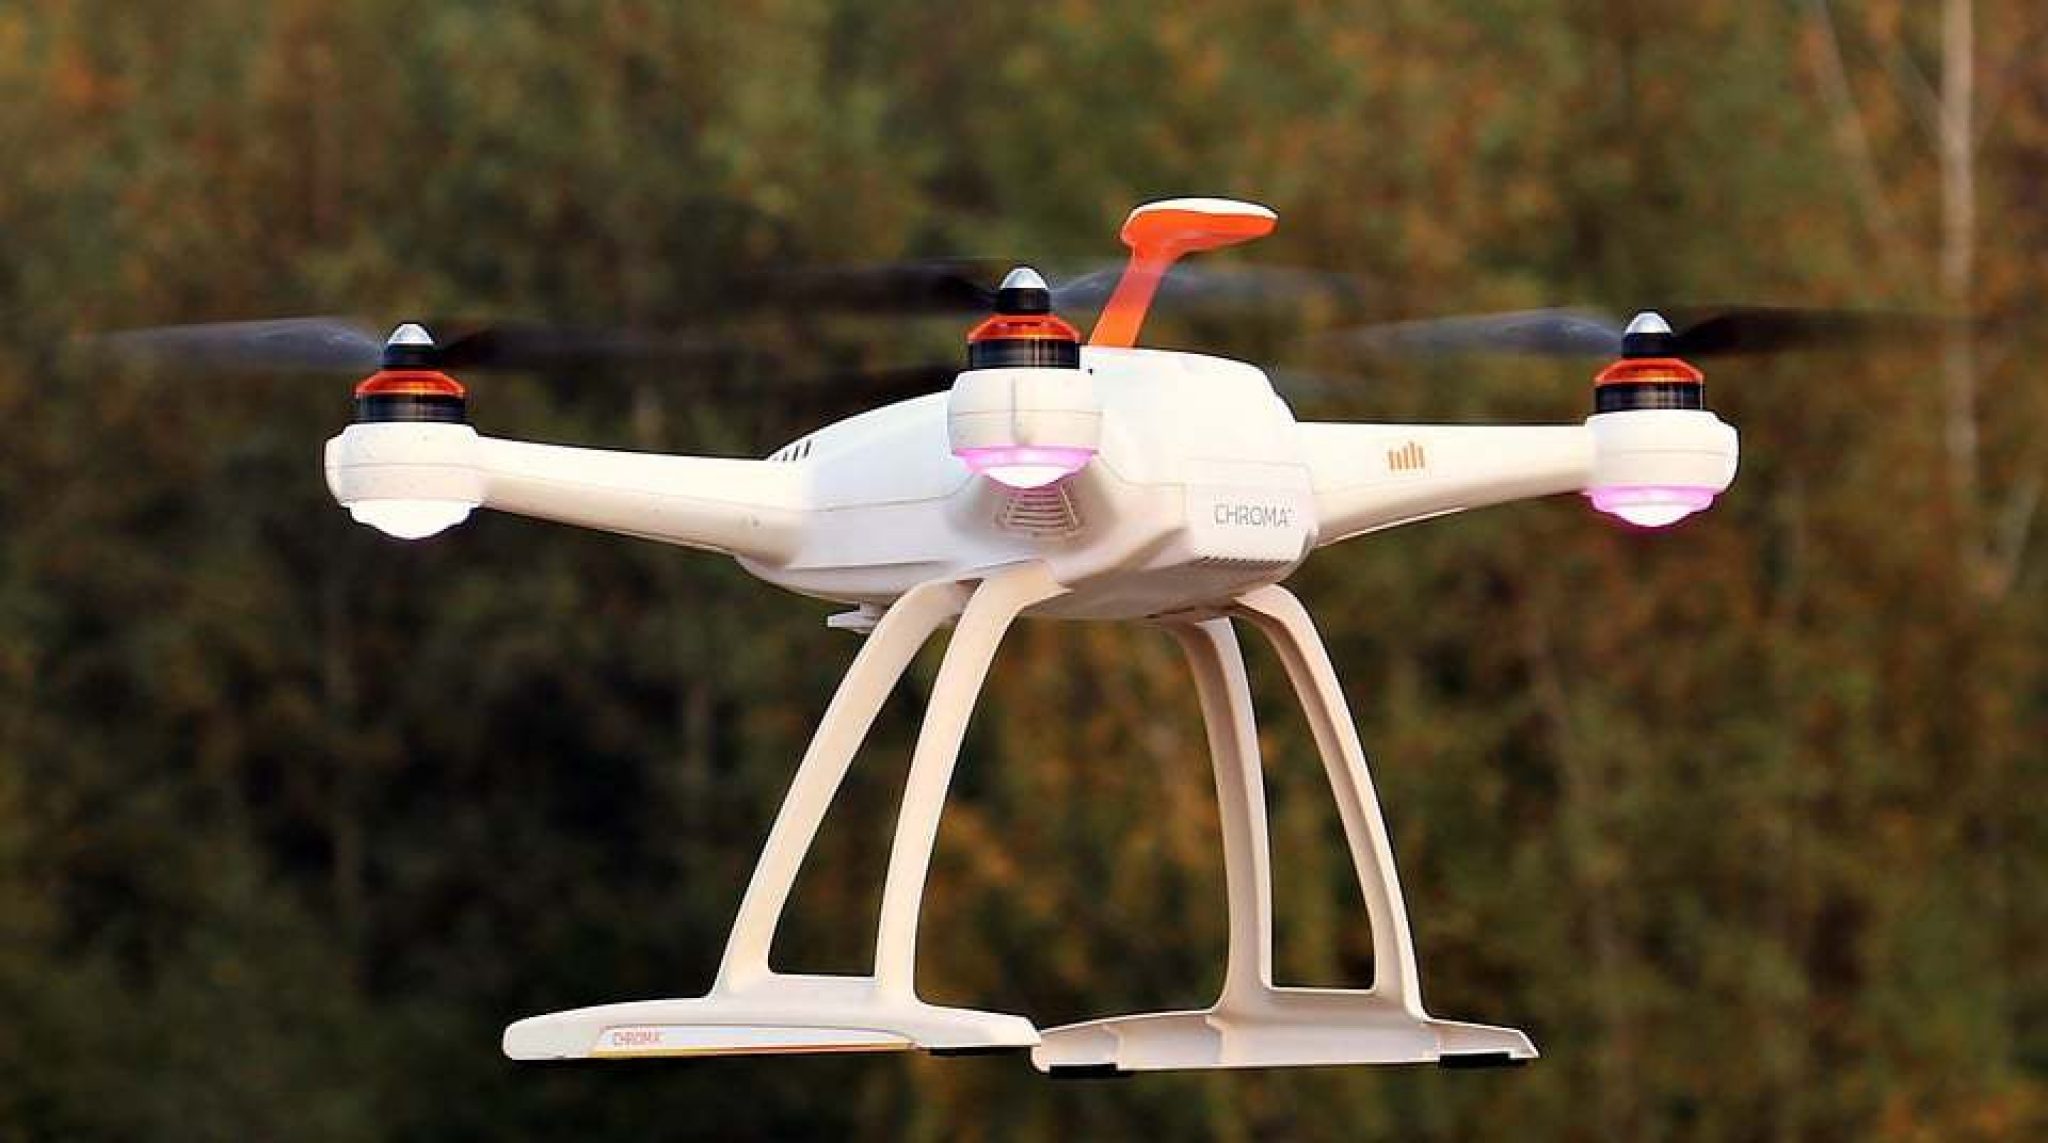 Top 5 Best Pro Drones for Mapping and Surveying in 2022 WebSta.ME